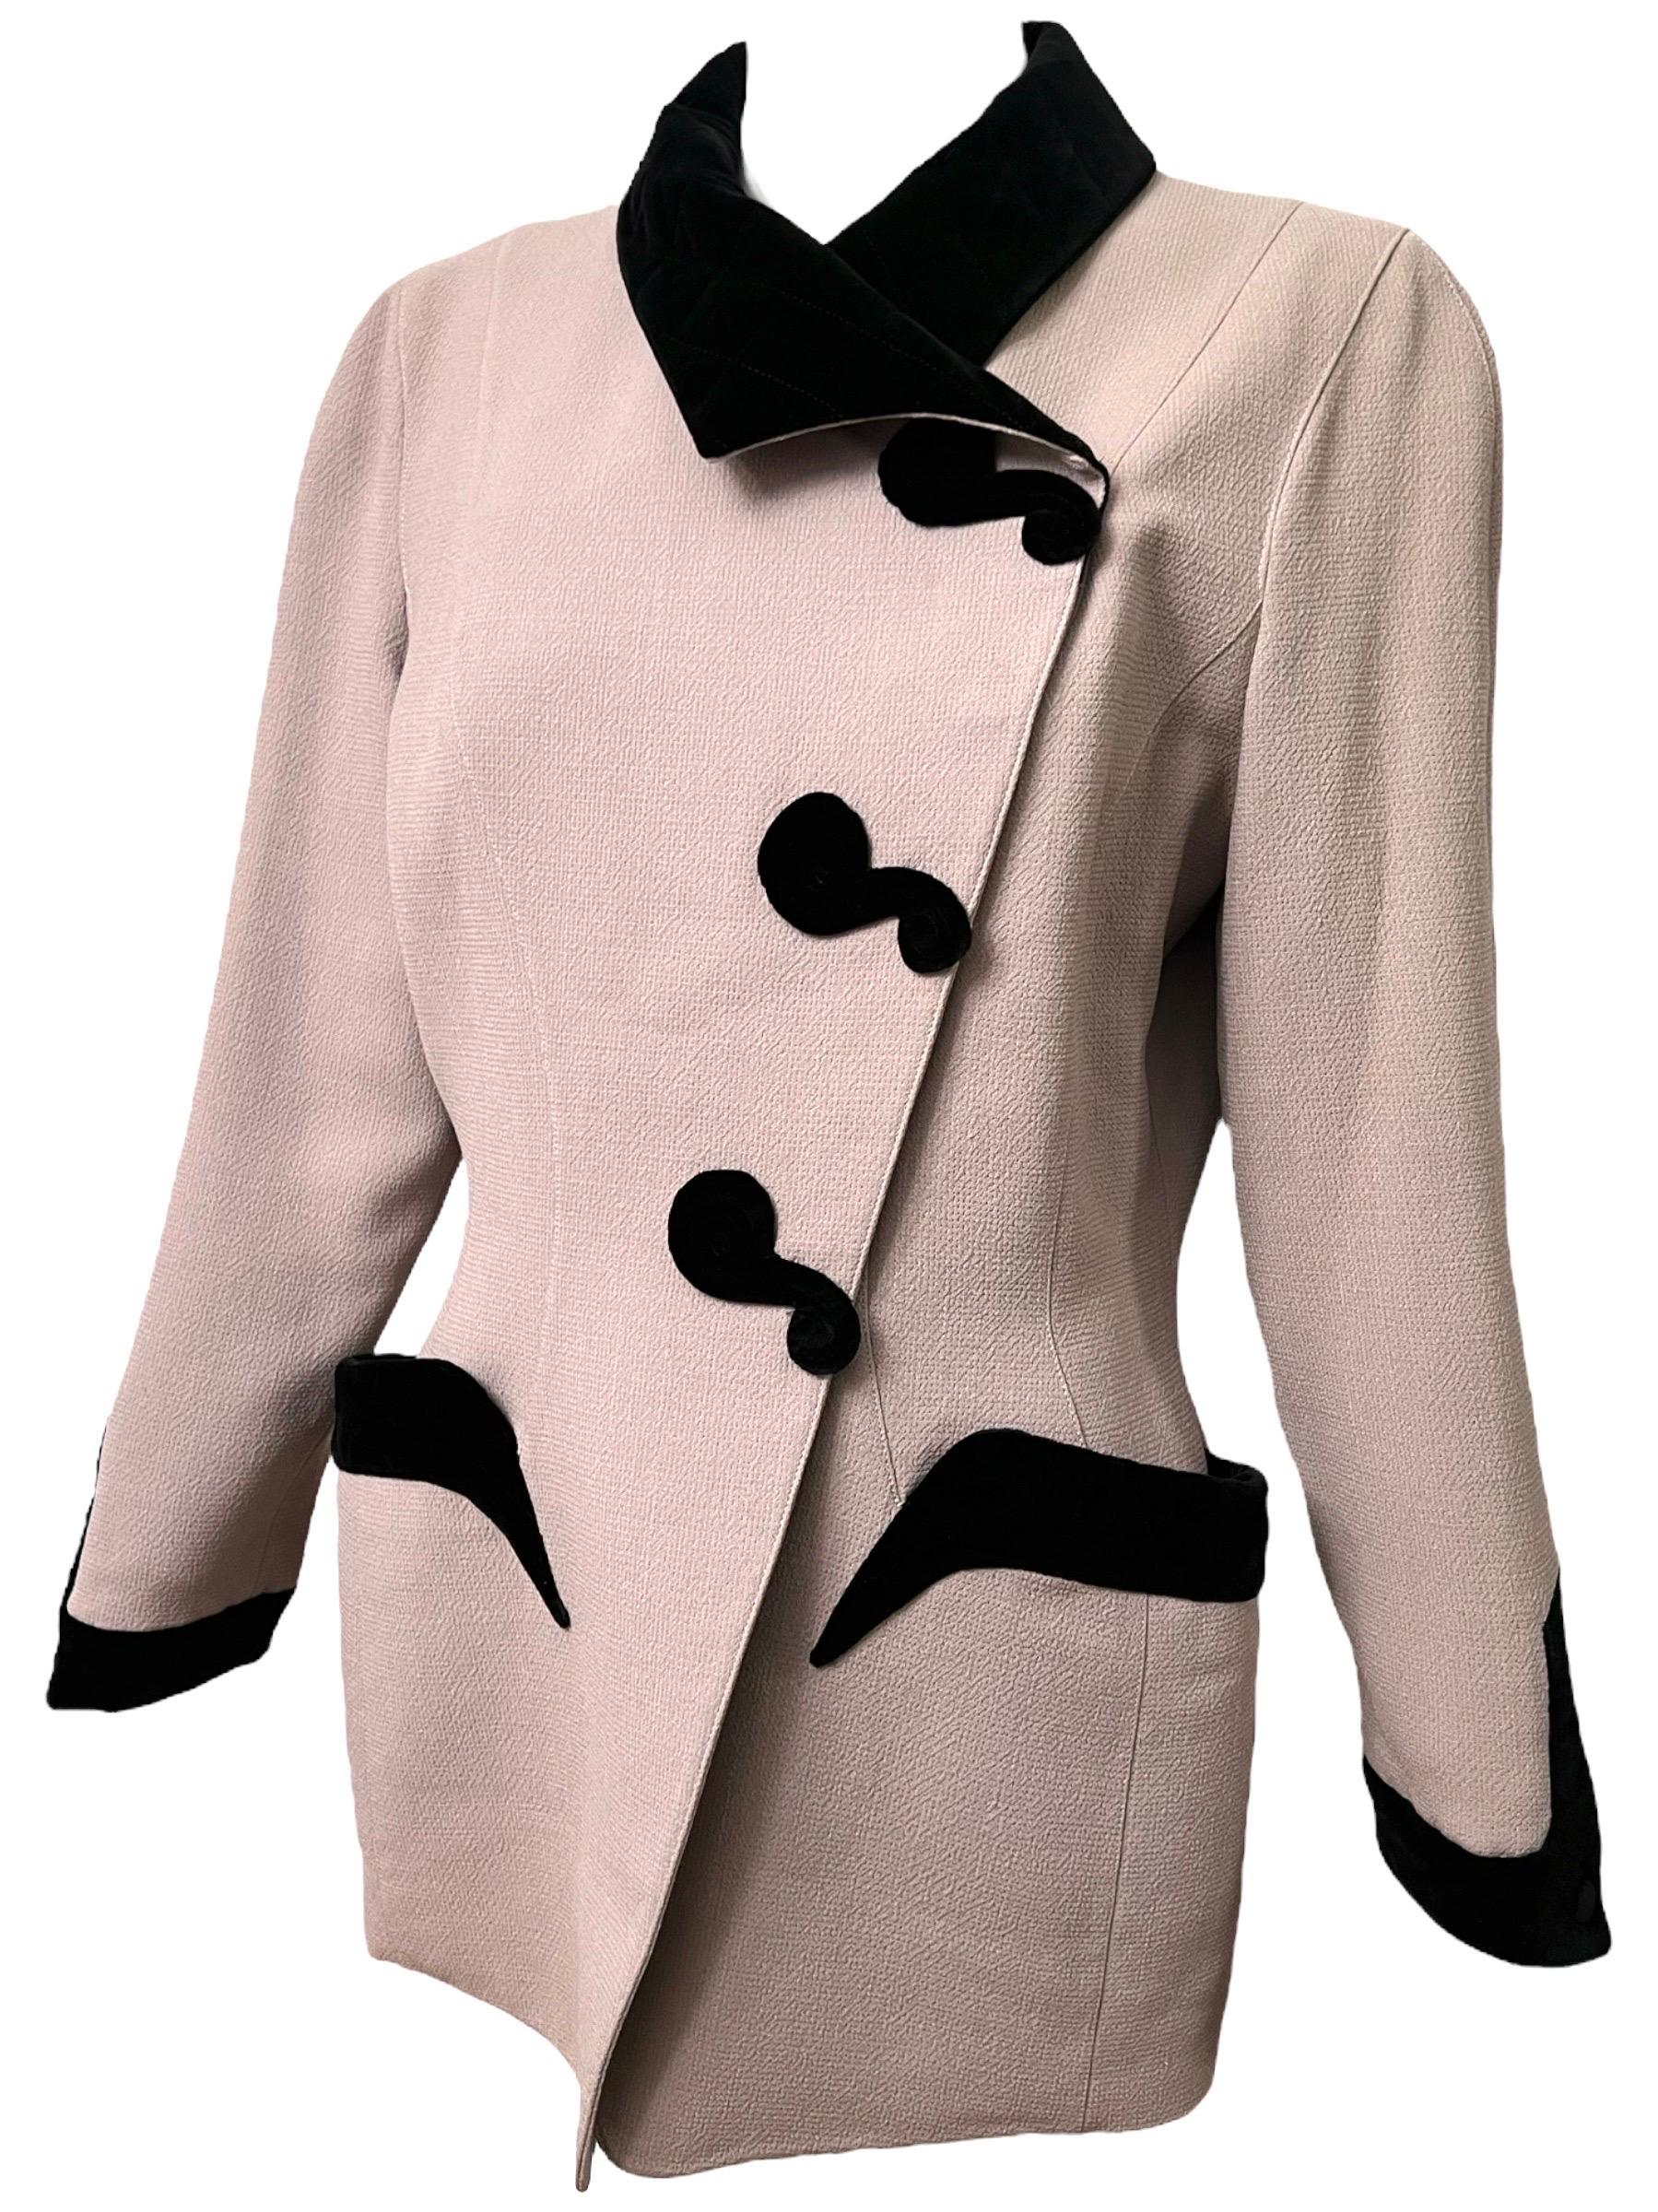 F/W 1993 Thierry Mugler Cream Wool Black Velvet Trim Runway Jacket In Excellent Condition For Sale In Concord, NC